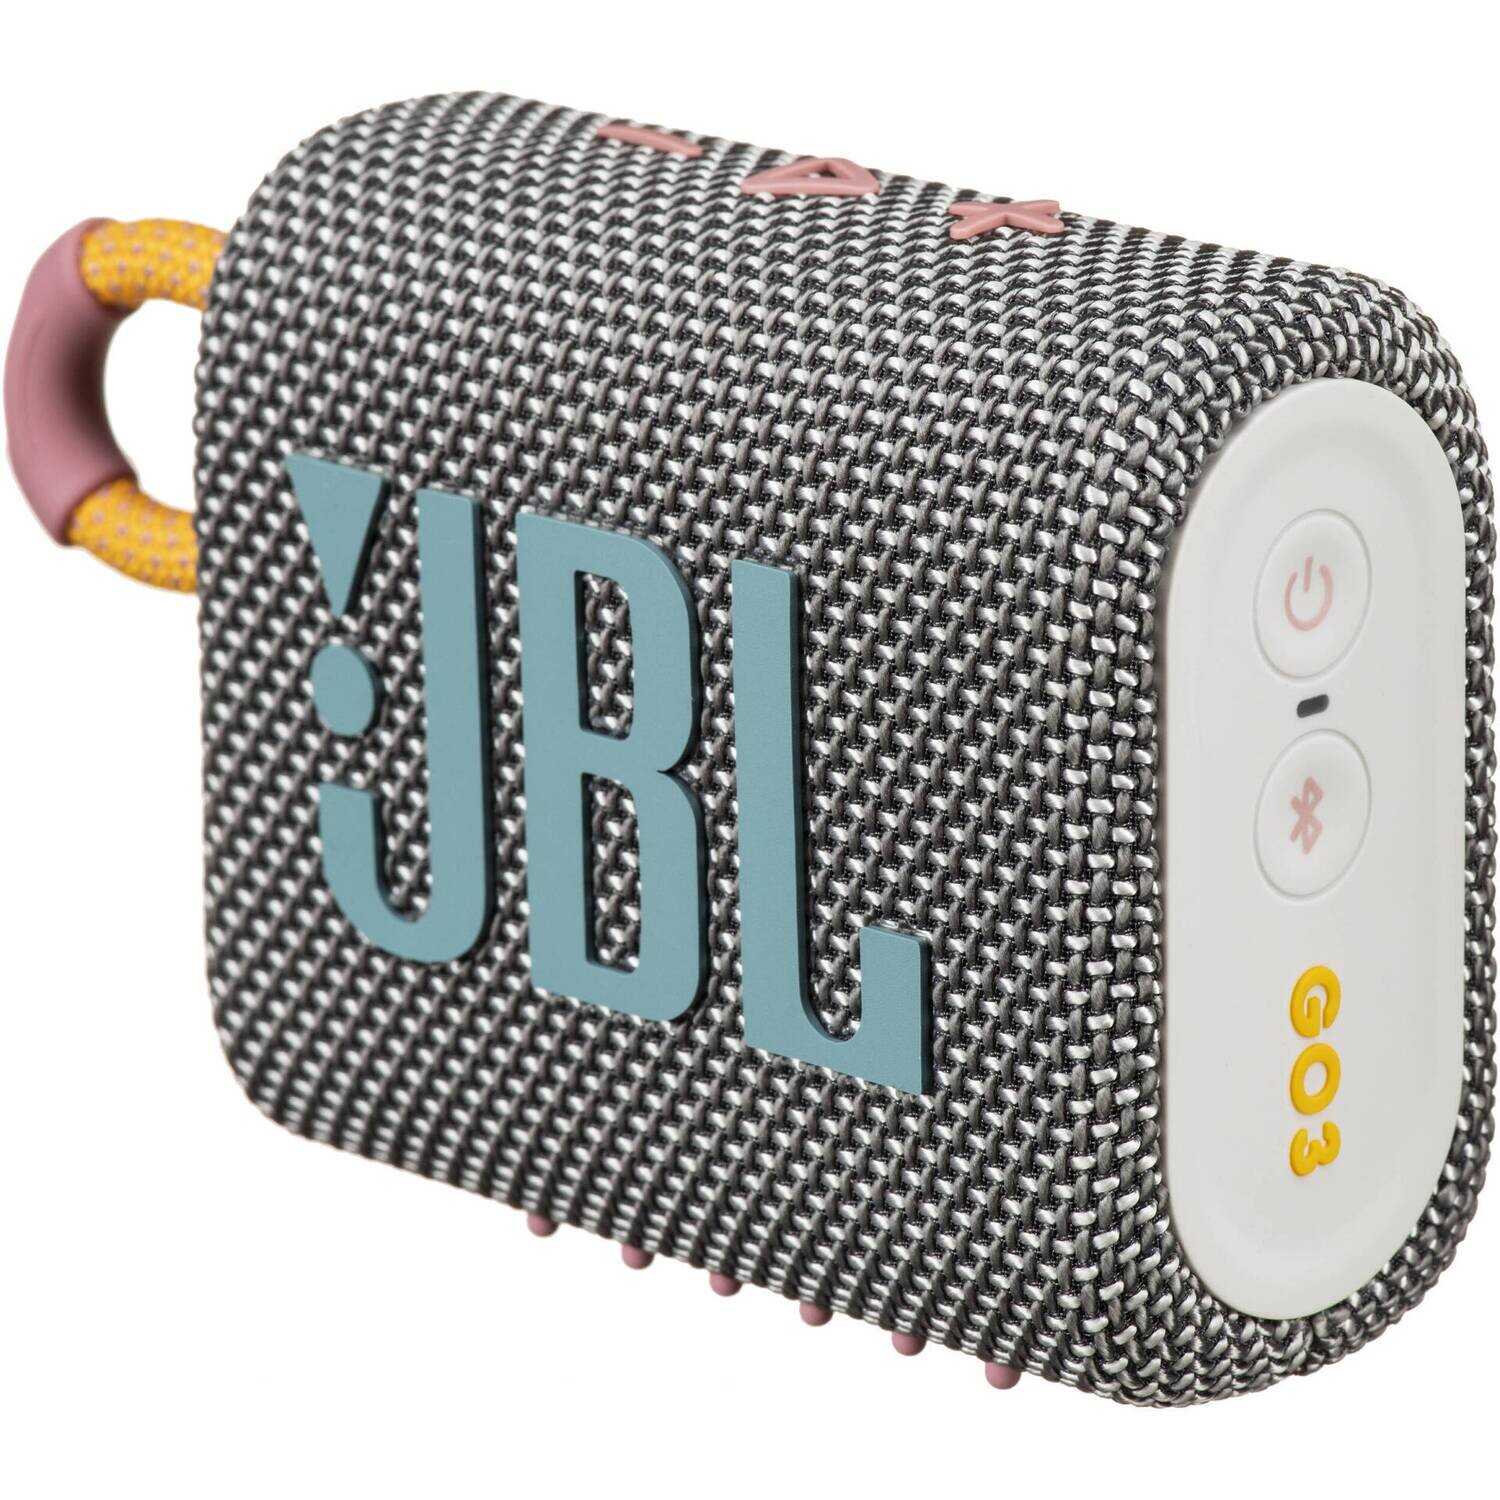 JBL Go 3: Portable Speaker with Bluetooth, Built In Battery